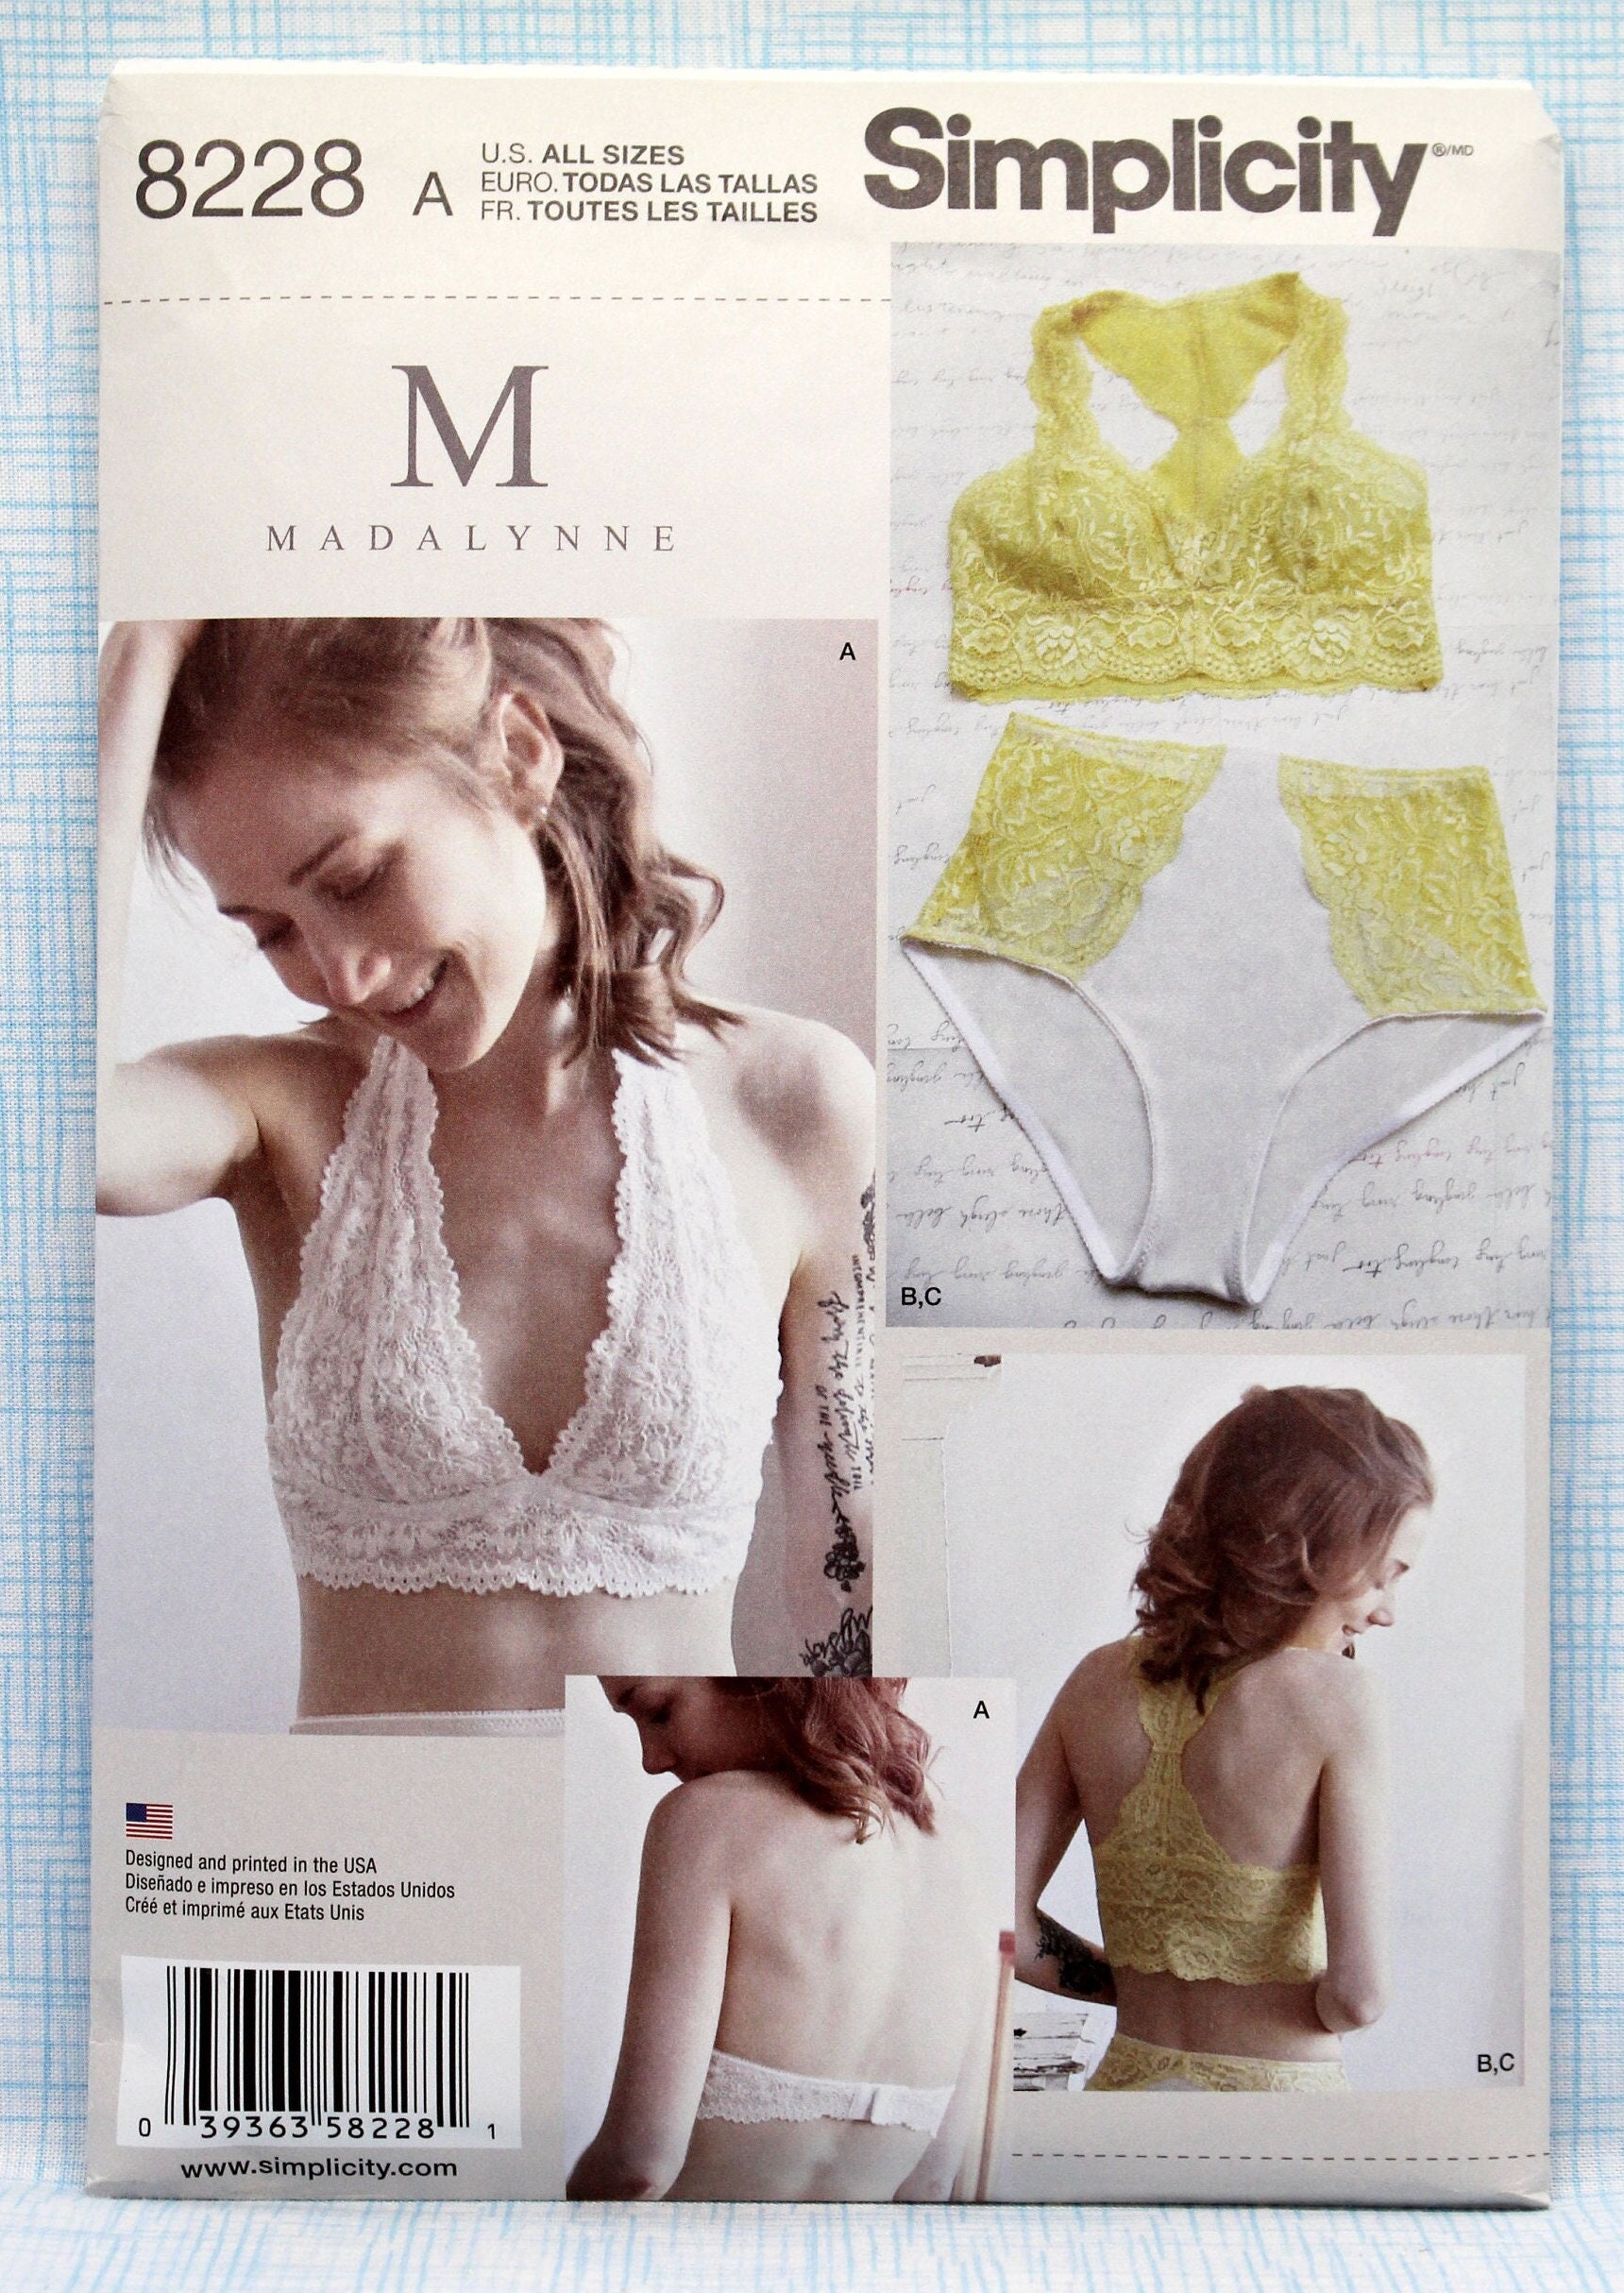 Buy Simplicity Sewing Pattern 8228, Misses' Soft Cup Bra With